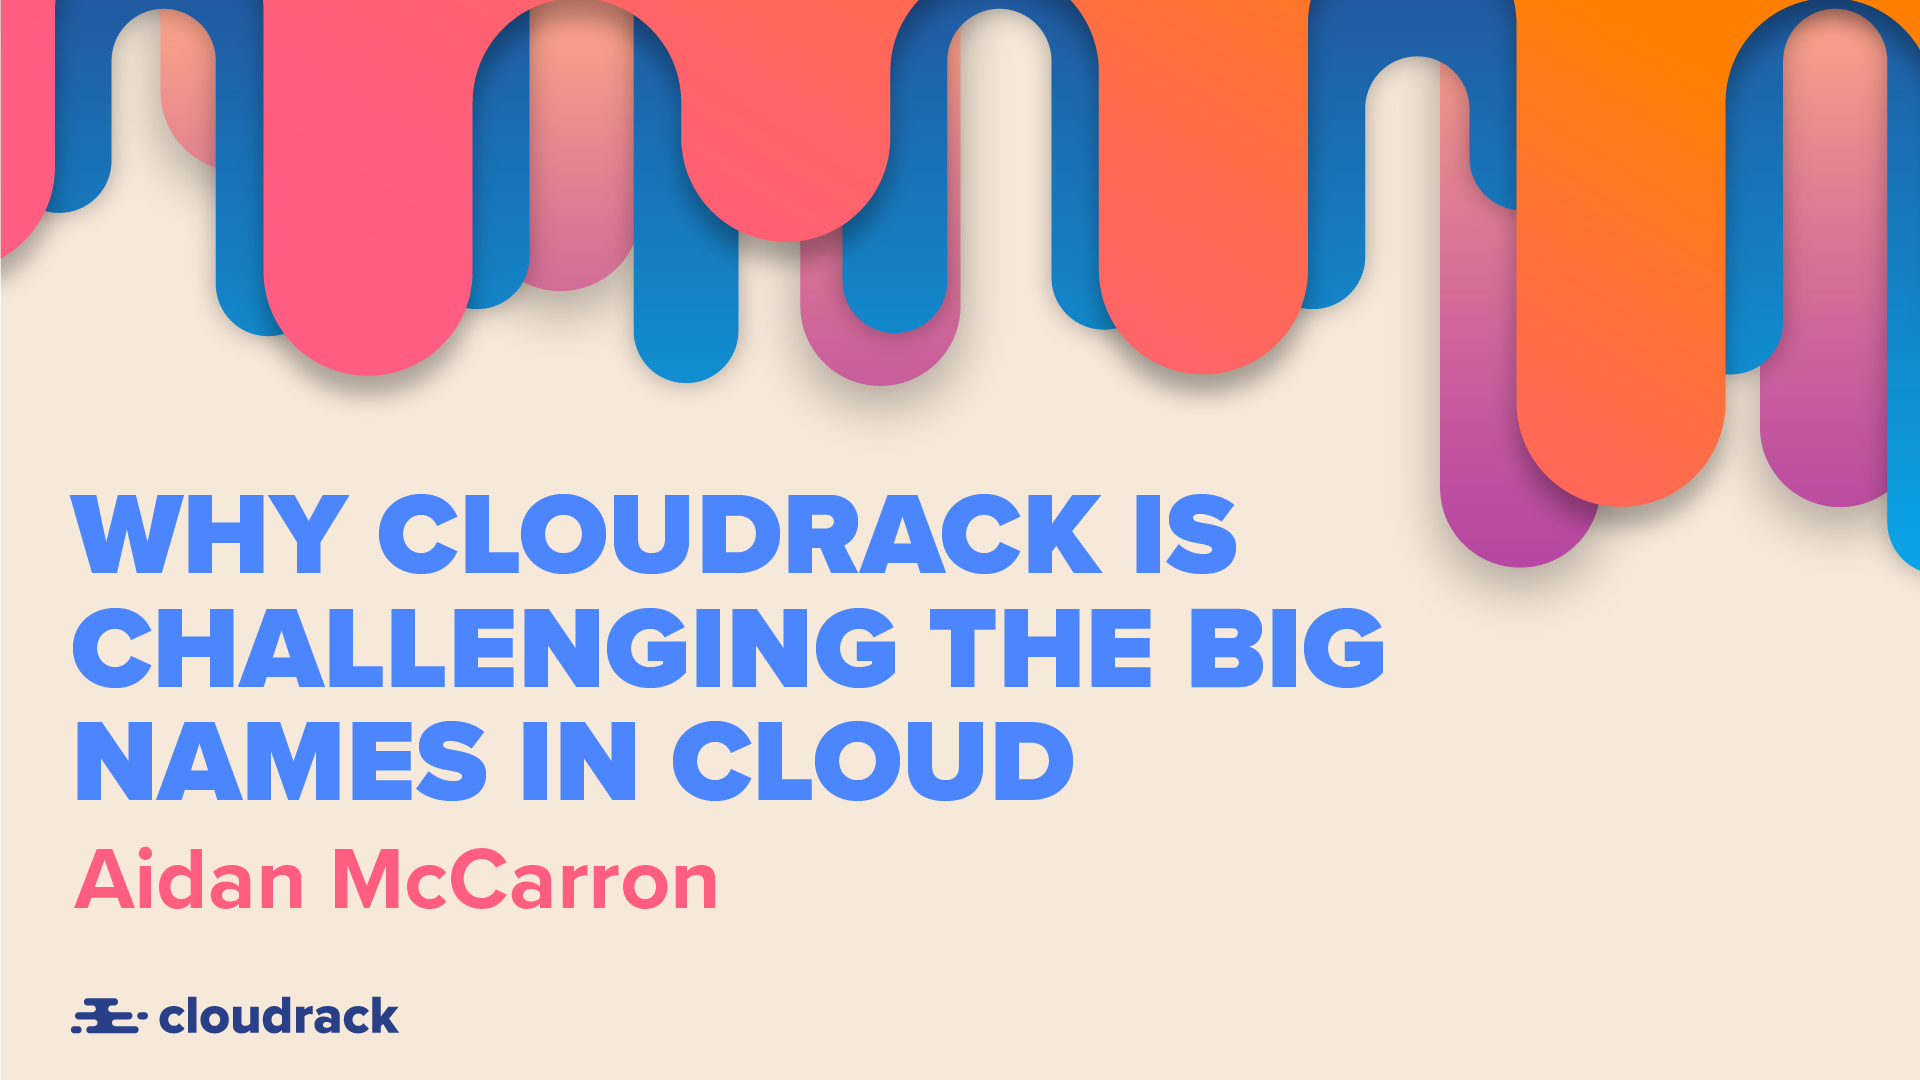 Why Cloudrack is challenging the big names in cloud: Aidan McCarron